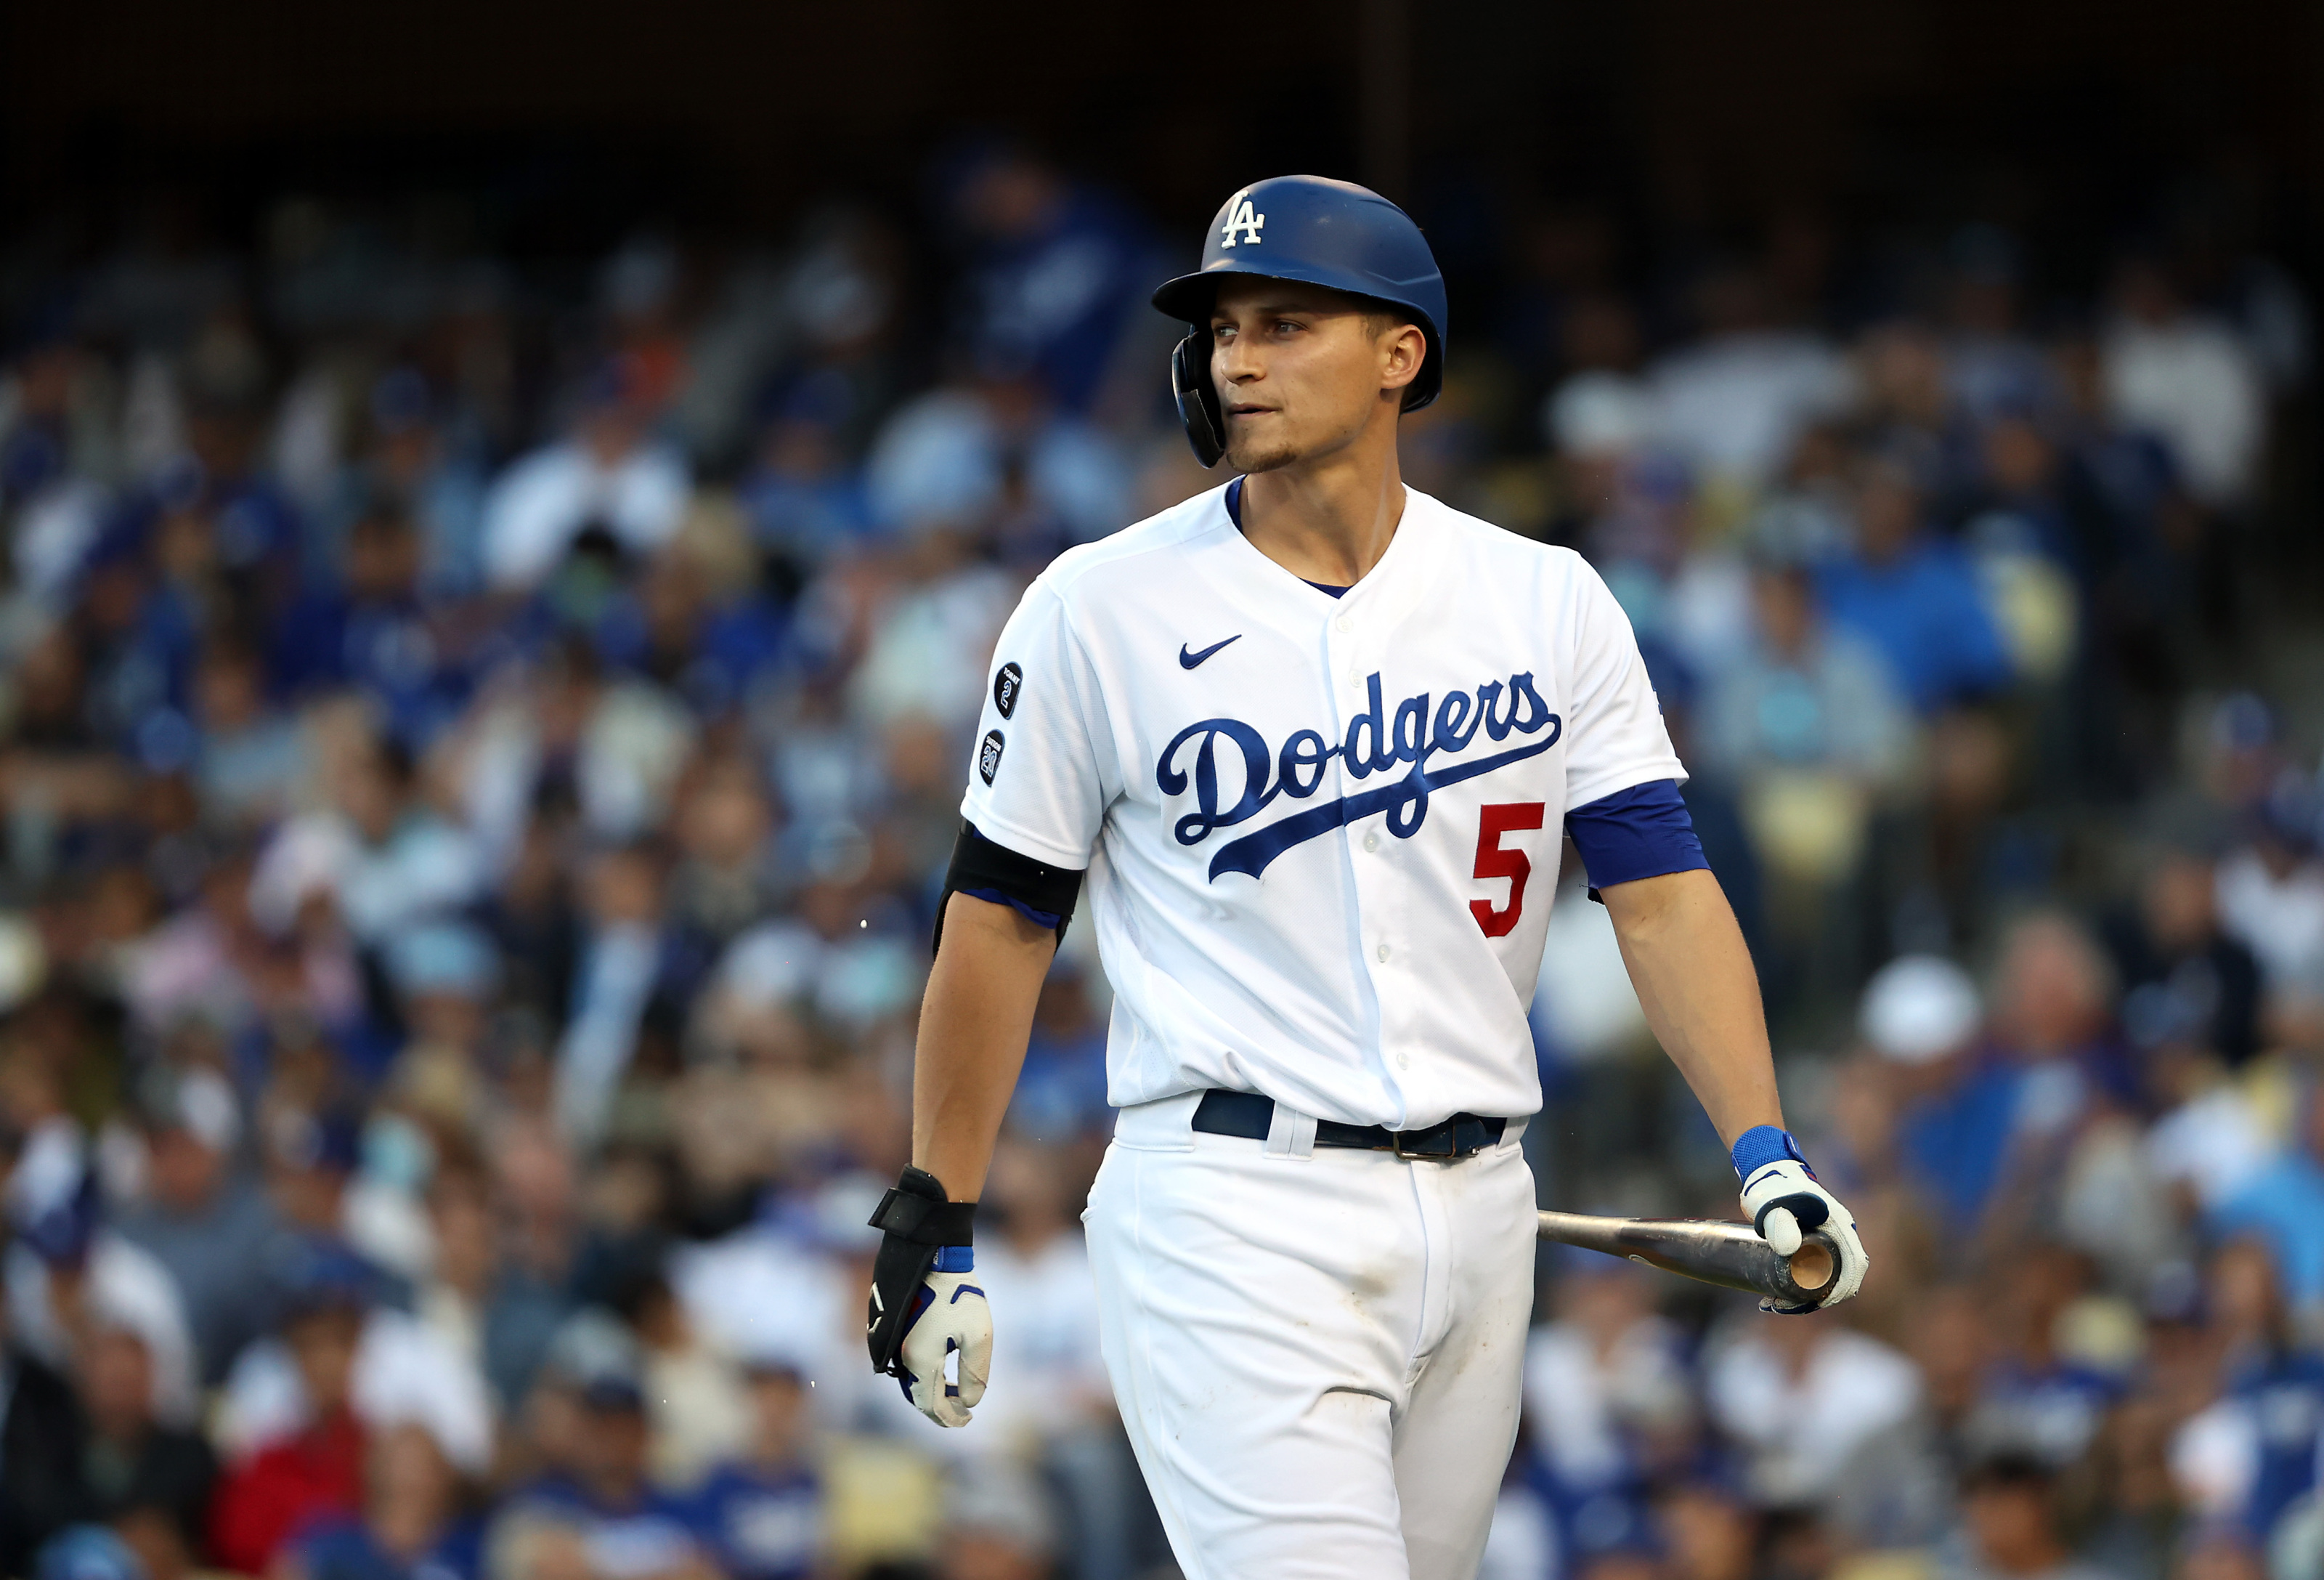 Top-selling Item] Corey Seager Los Angeles Dodgers Road Official